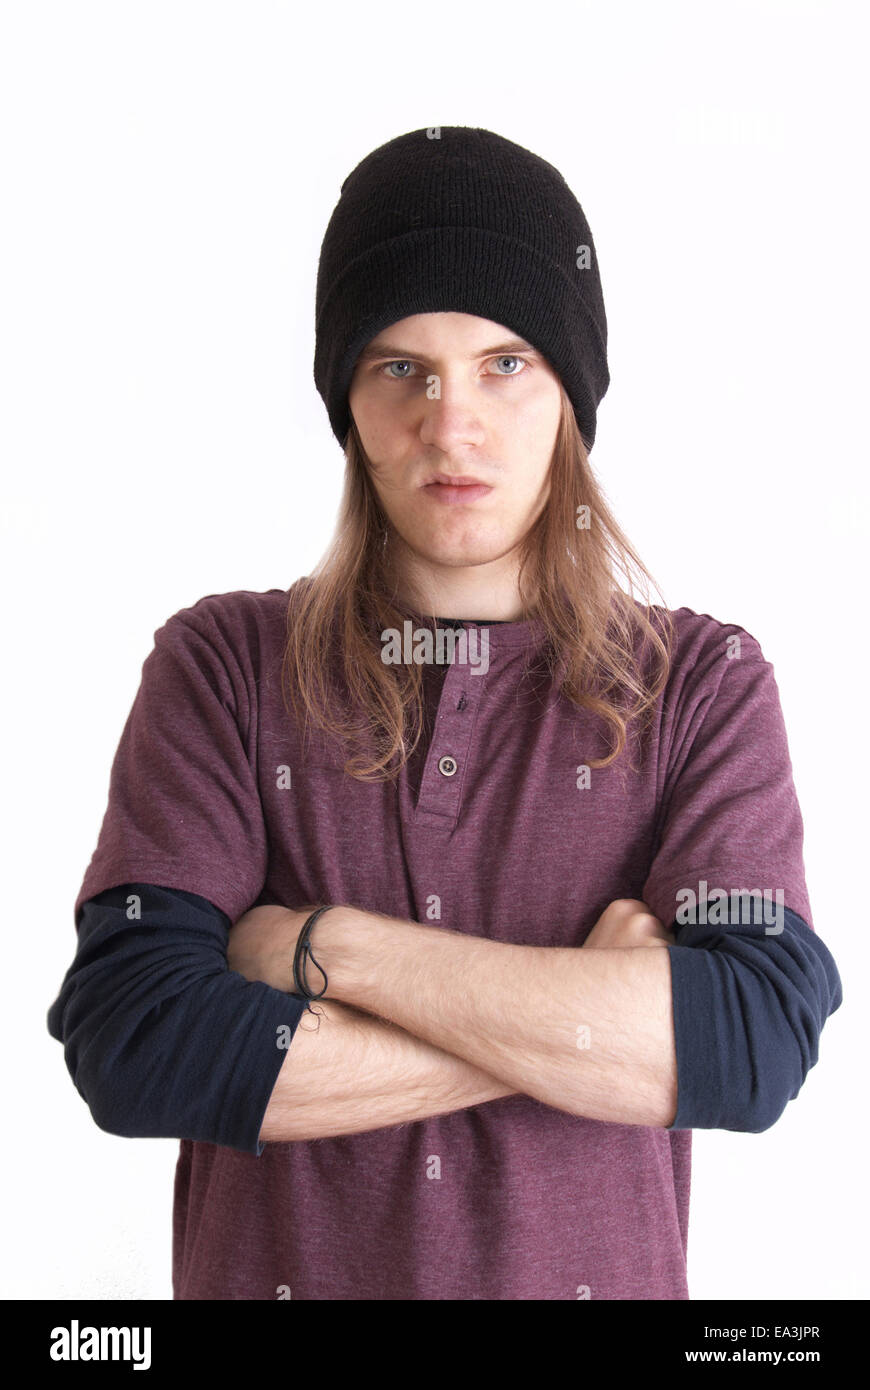 Emotions conceputal image. Angry rebellious teenager with long hair. Stock Photo